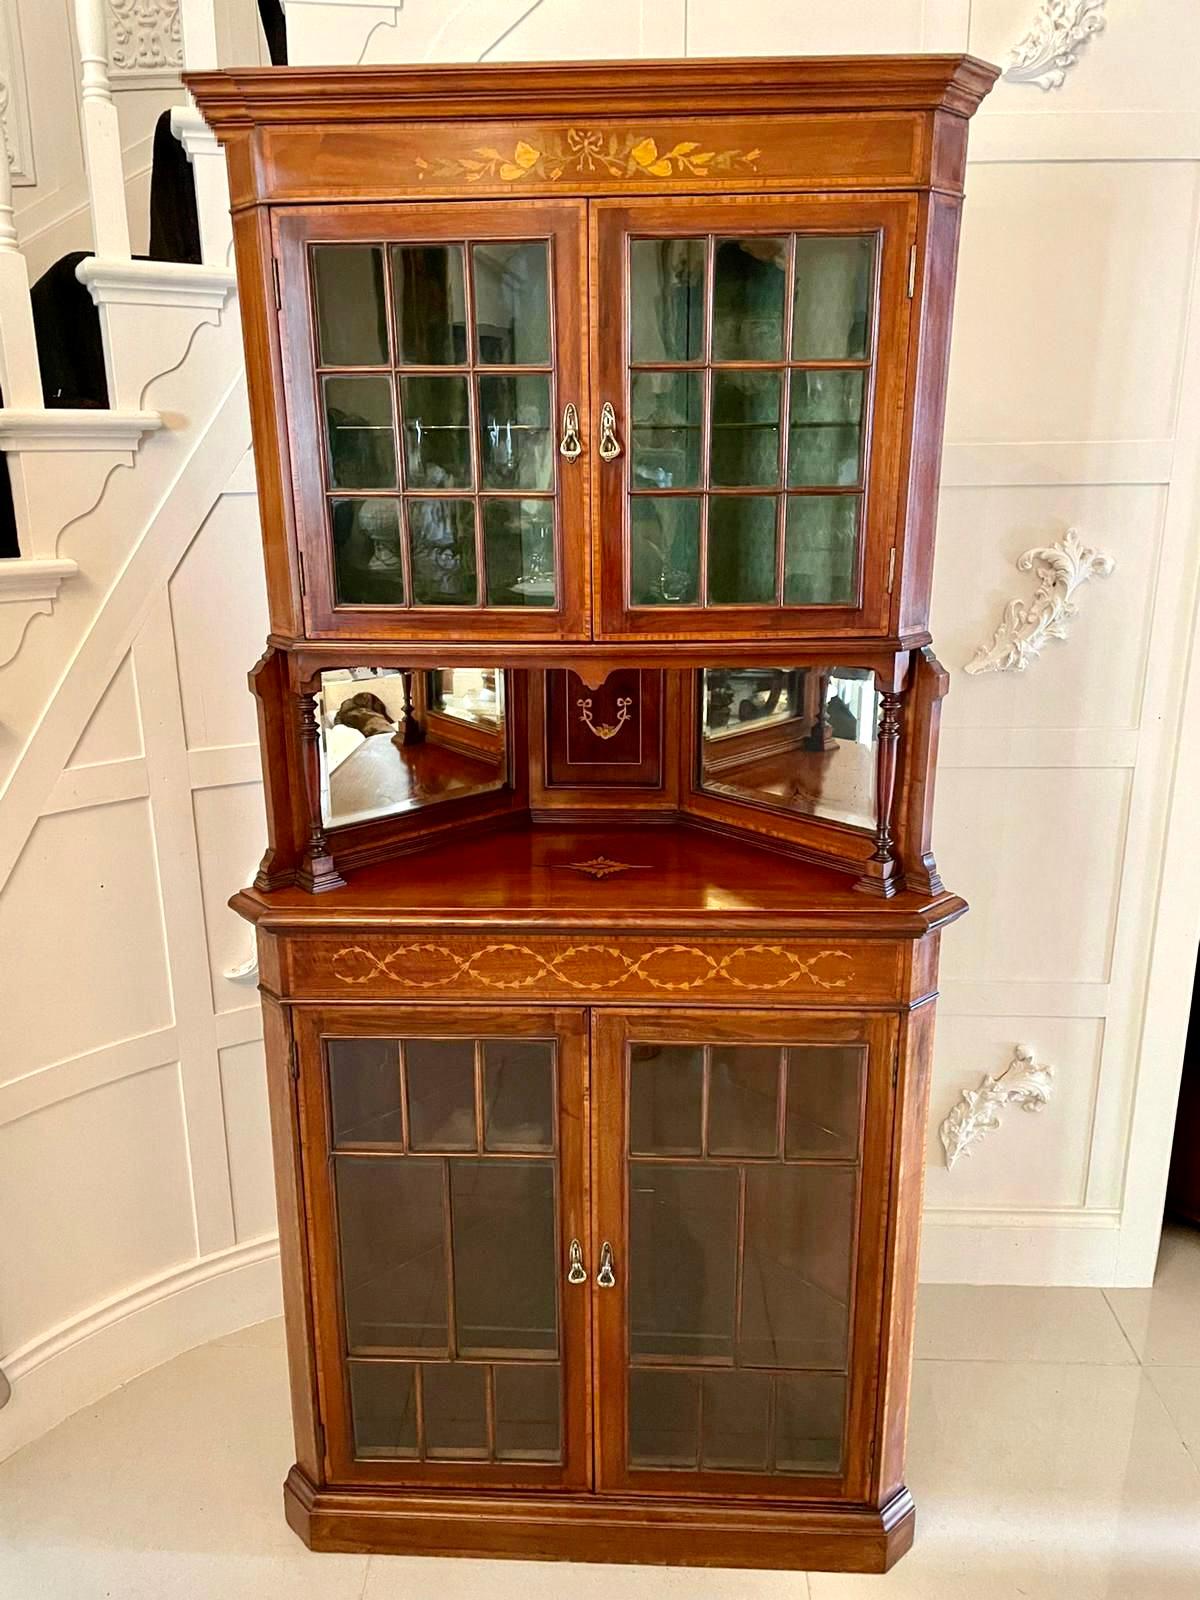 Antique Edwardian quality mahogany inlaid corner display cabinet having a shaped cornice above an attractive quality marquetry inlaid frieze. It boasts a pair of mahogany inlaid astral glazed doors with original brass handles opening to reveal an